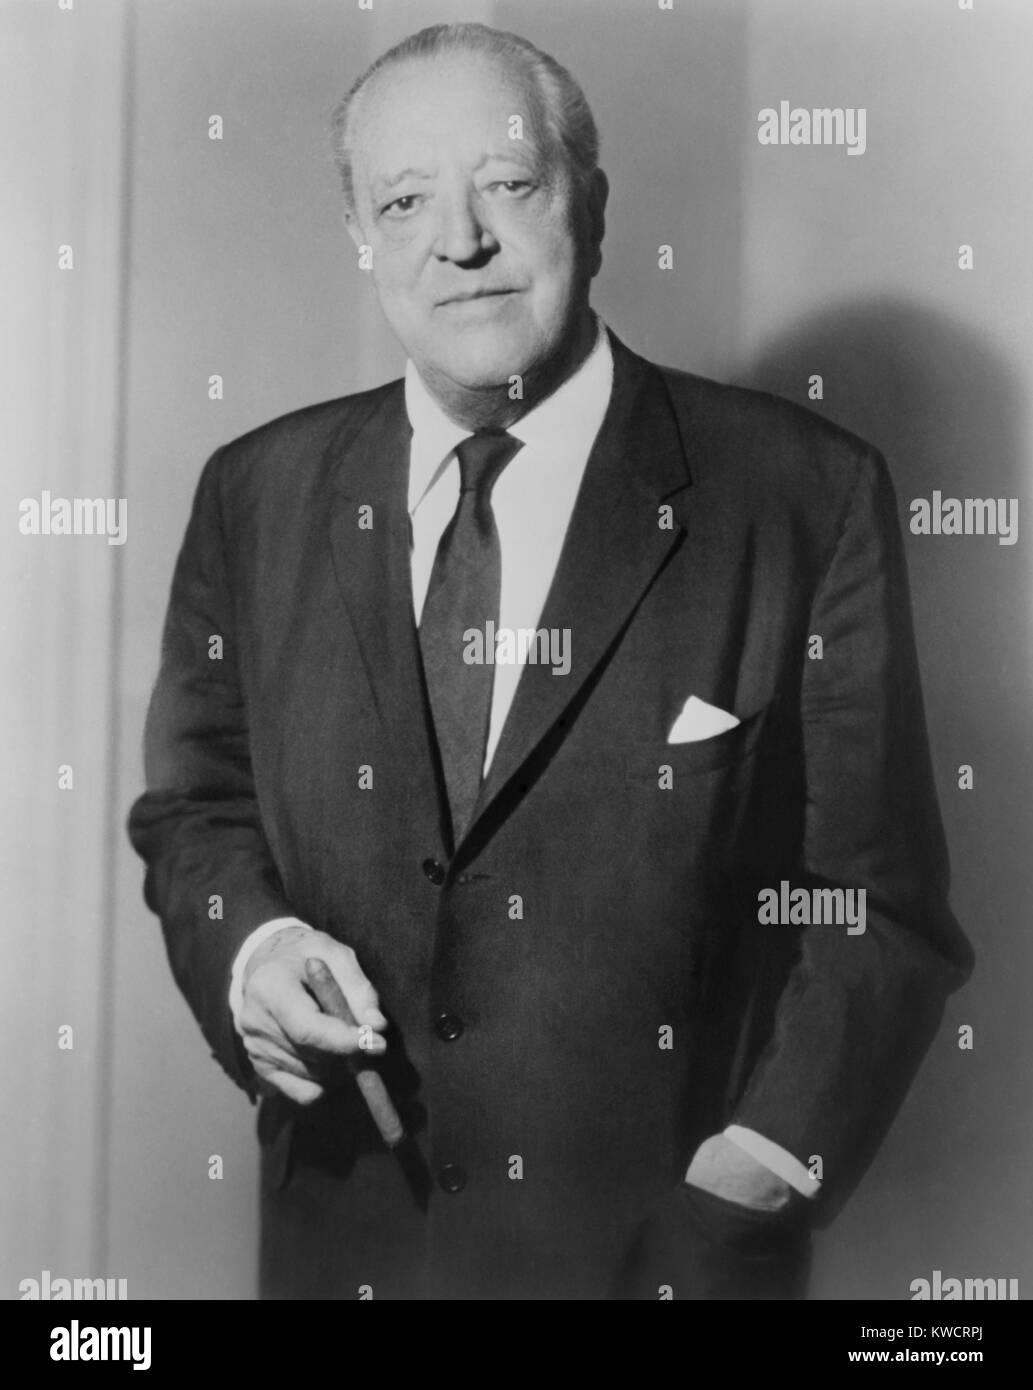 Ludwig Mies van der Rohe, German-American architect and educator. Mies emigrated to the U.S.in 1937, and settled in Chicago to head the architecture department of the new Illinois Institute of Technology. Mies was one of the most important 20th c. International Style architects. - (BSLOC 2015 1 24) Stock Photo